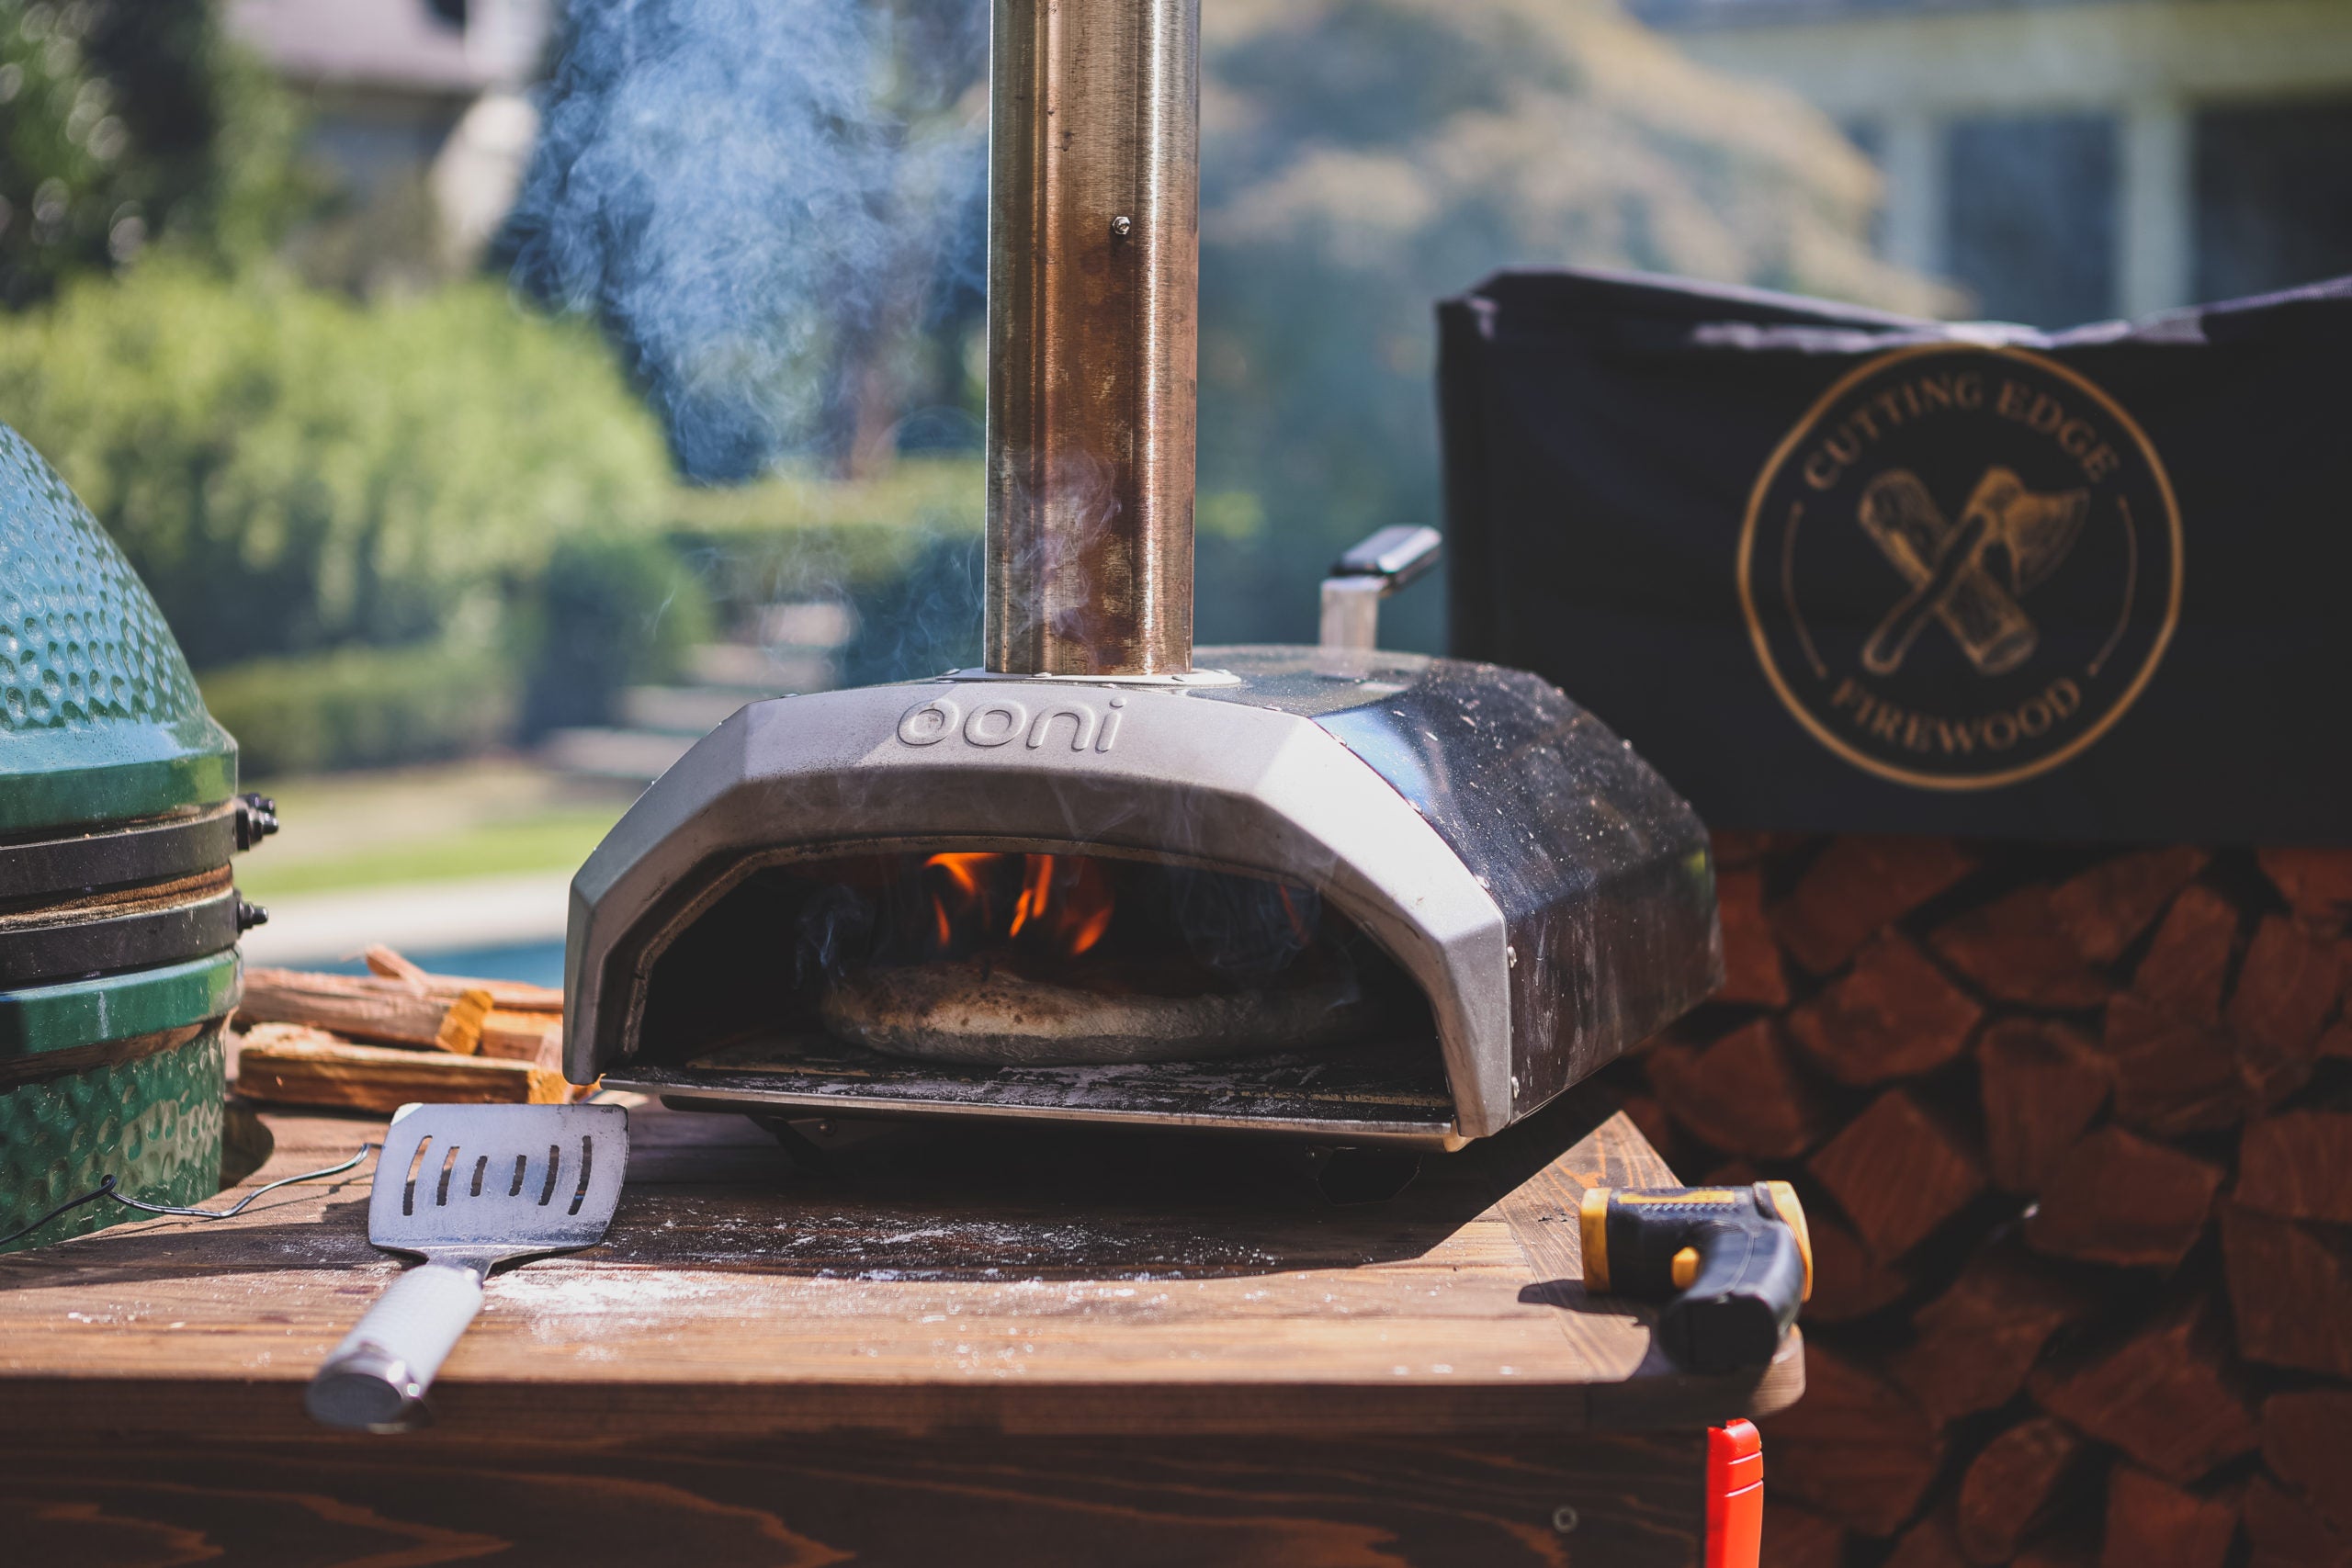 Ooni pizza oven
fire and smoke along with a pizza cooking in the pizza oven visable